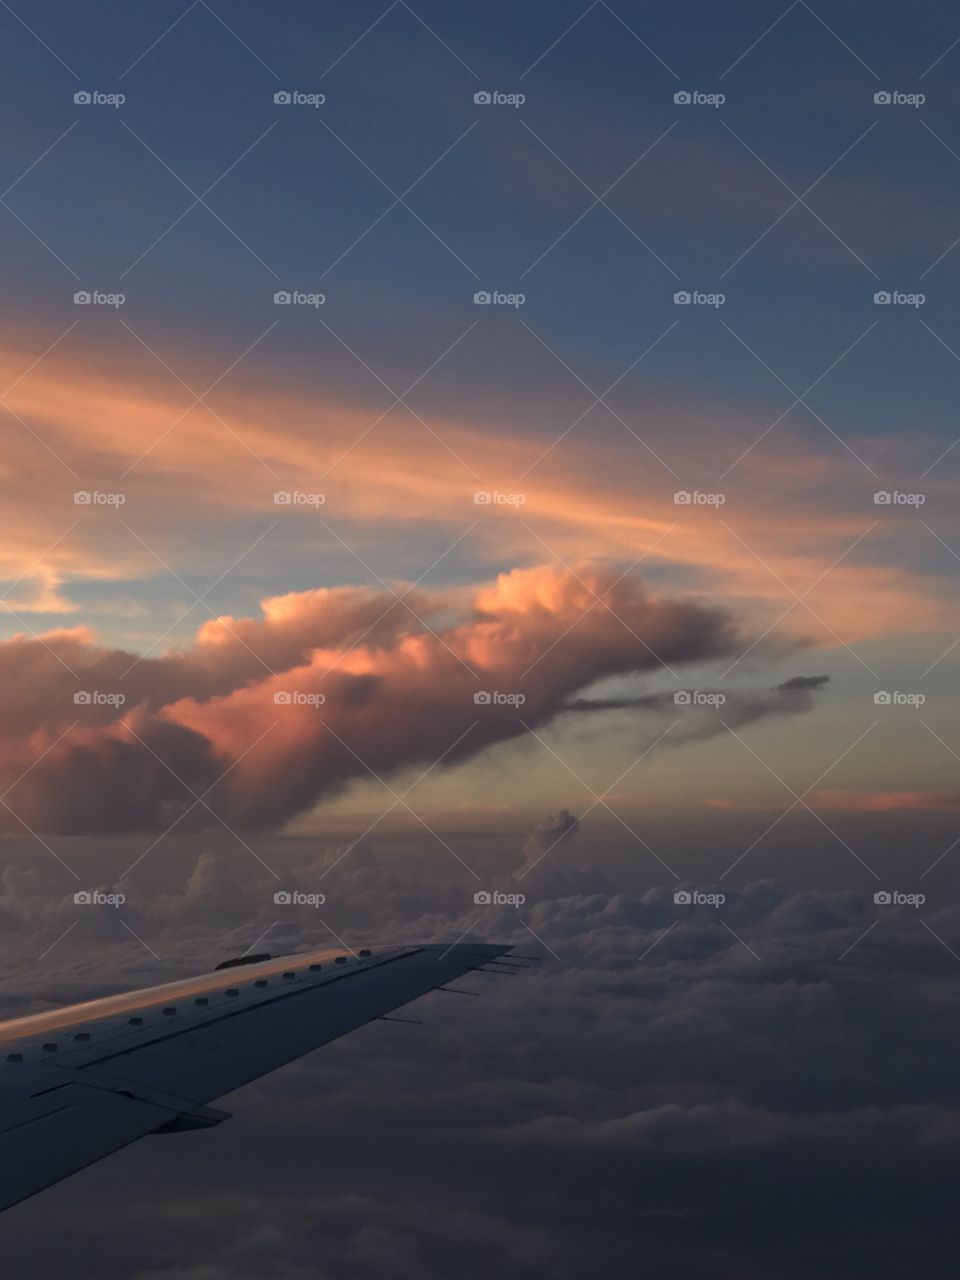 Sunset from above the clouds in an airplane.